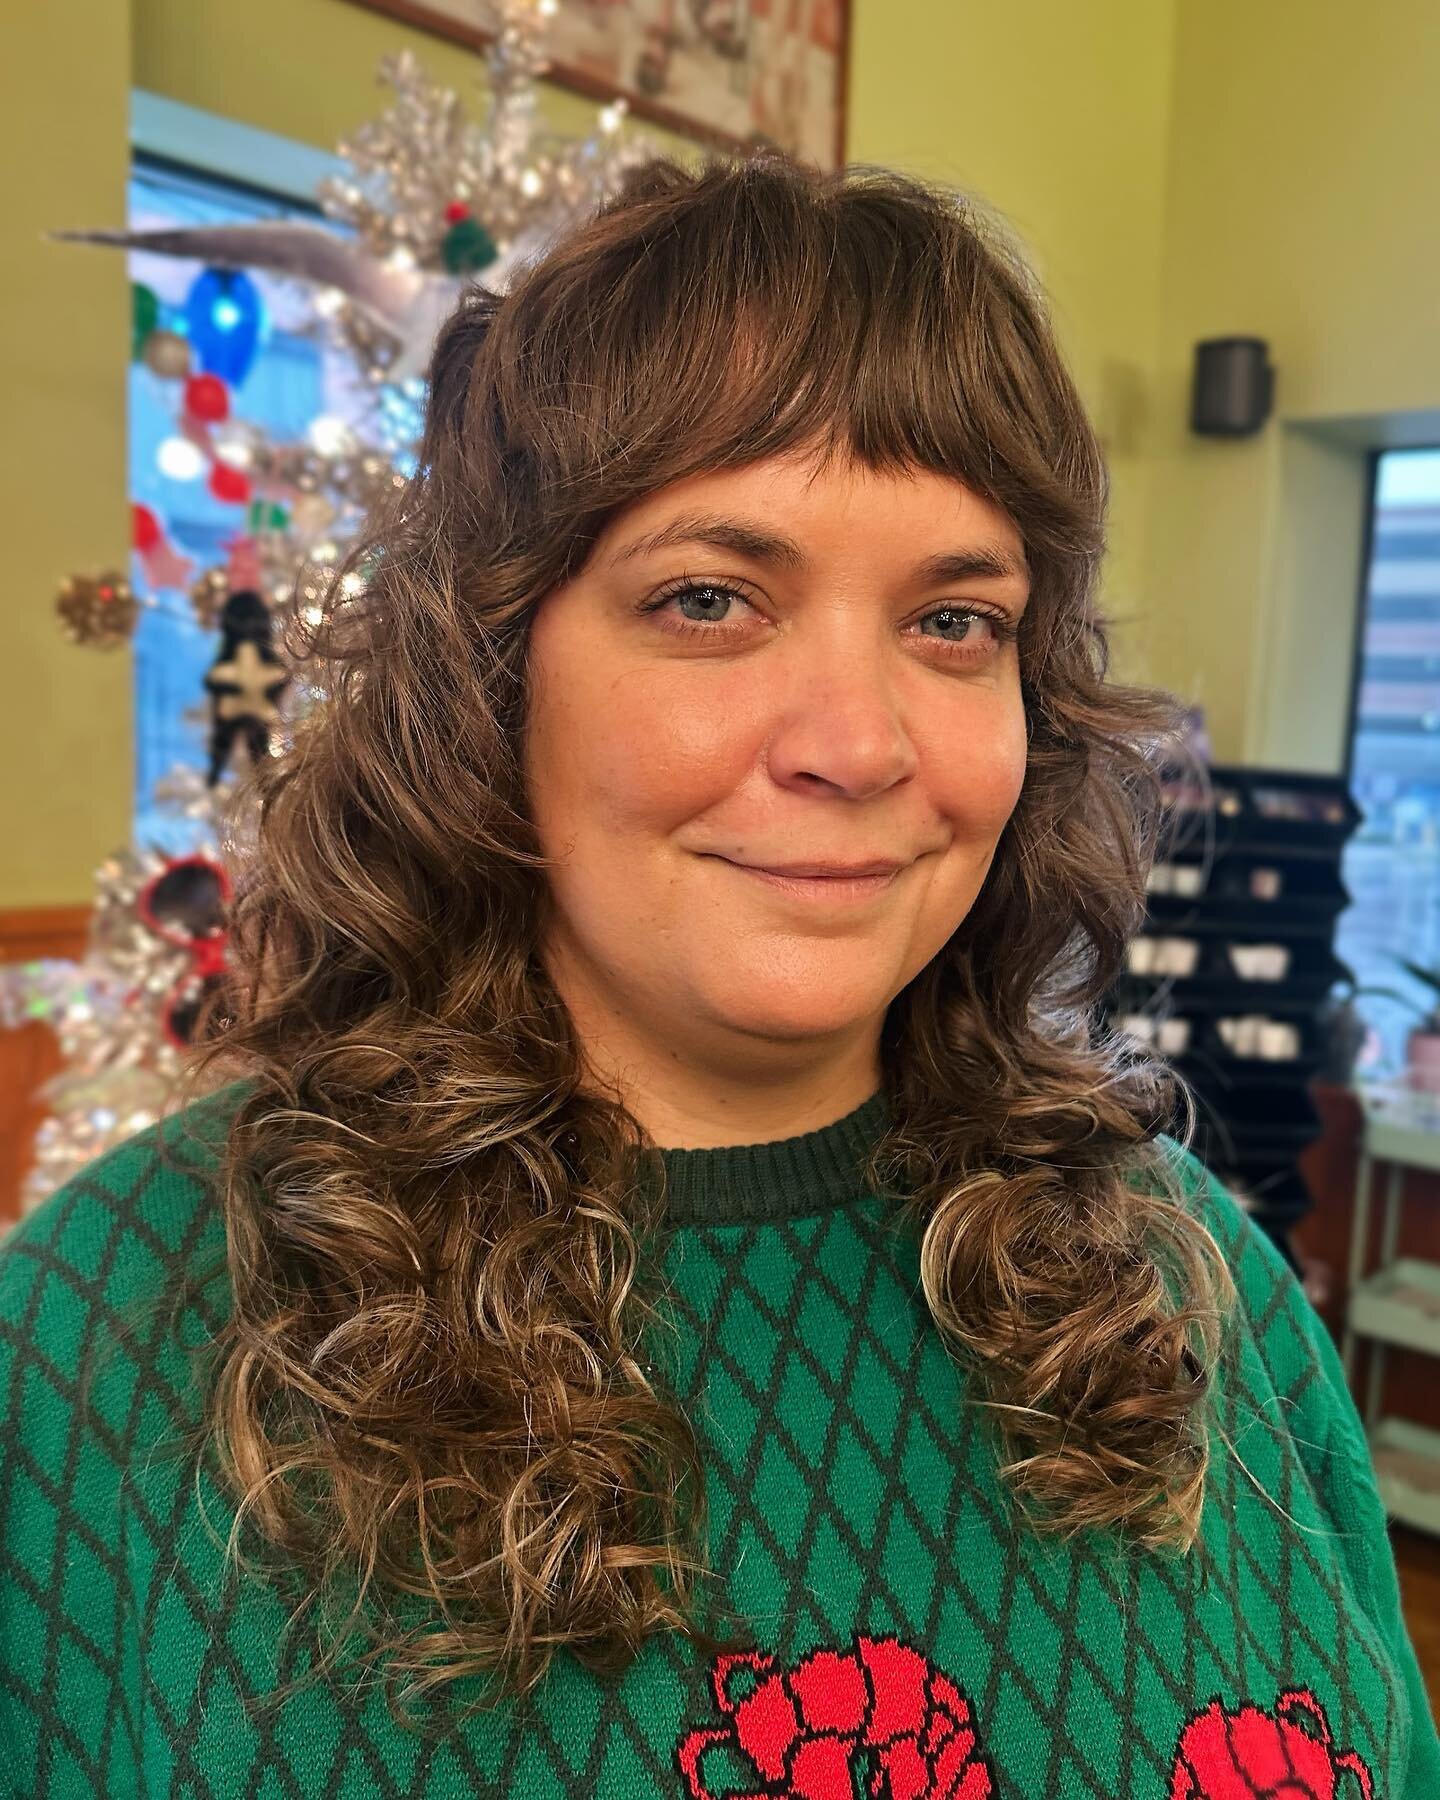 Getting into the holiday spirit here at @chachas_salon 🎄
Curly shag shape up for sweet Lesley. ✨

#chachasalon #lex #lexingtonky #lexingtonhair #lexingtonhairstylist #kyhair #kyhairstylist #lexky #universityofkentucky #shaghaircut